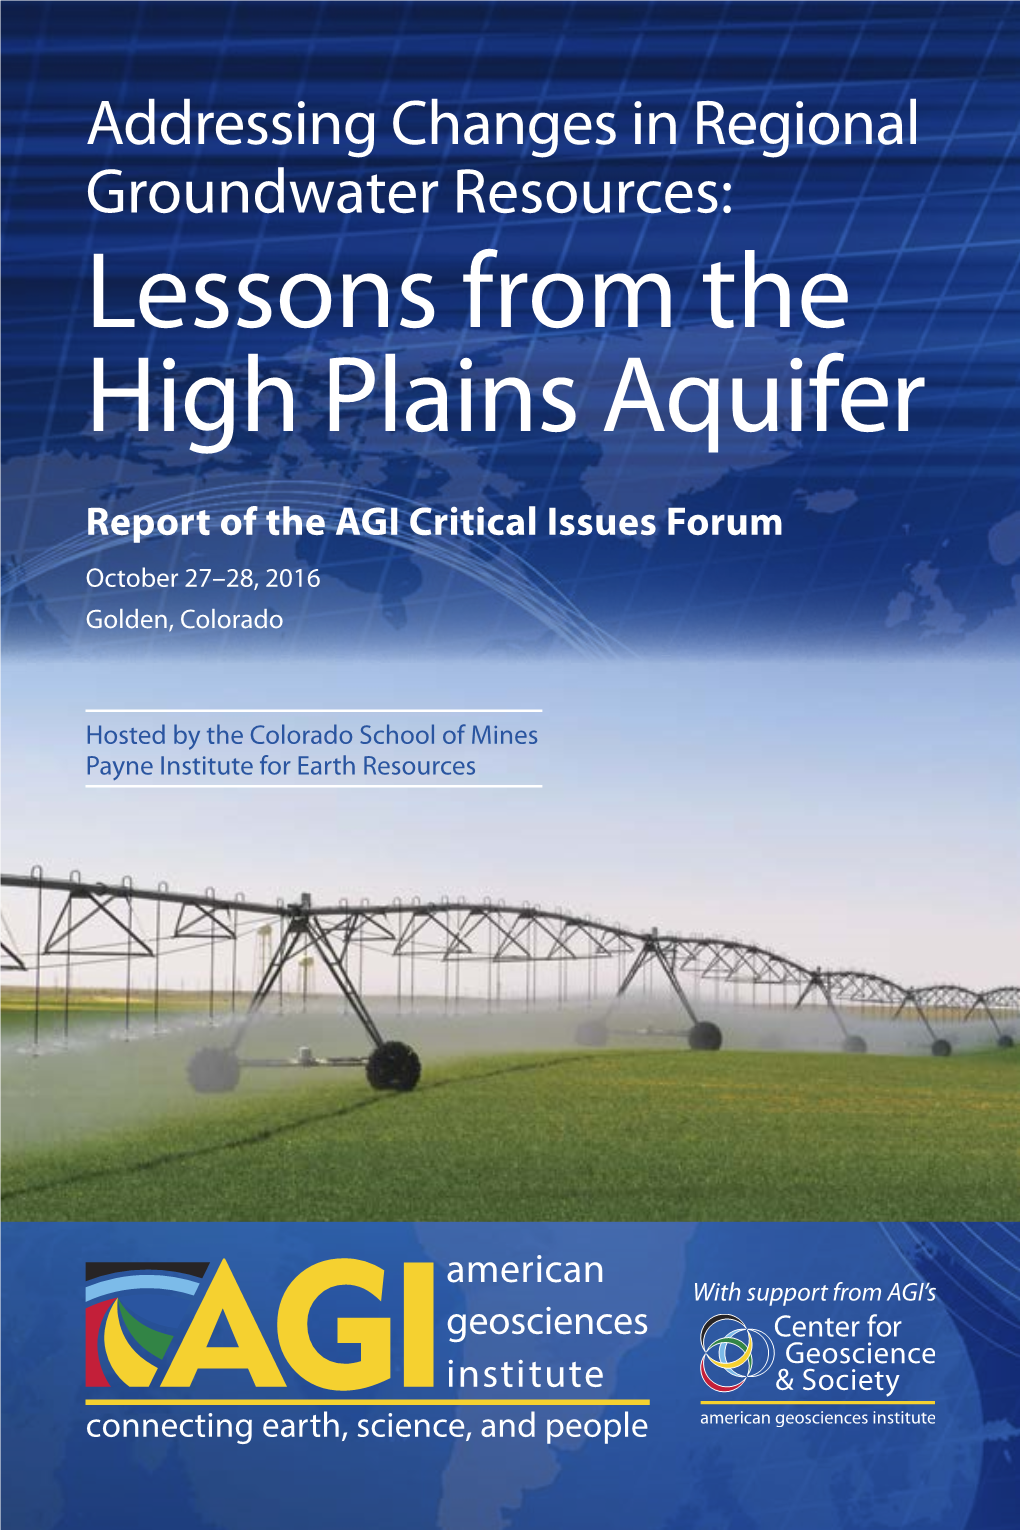 Lessons from the High Plains Aquifer